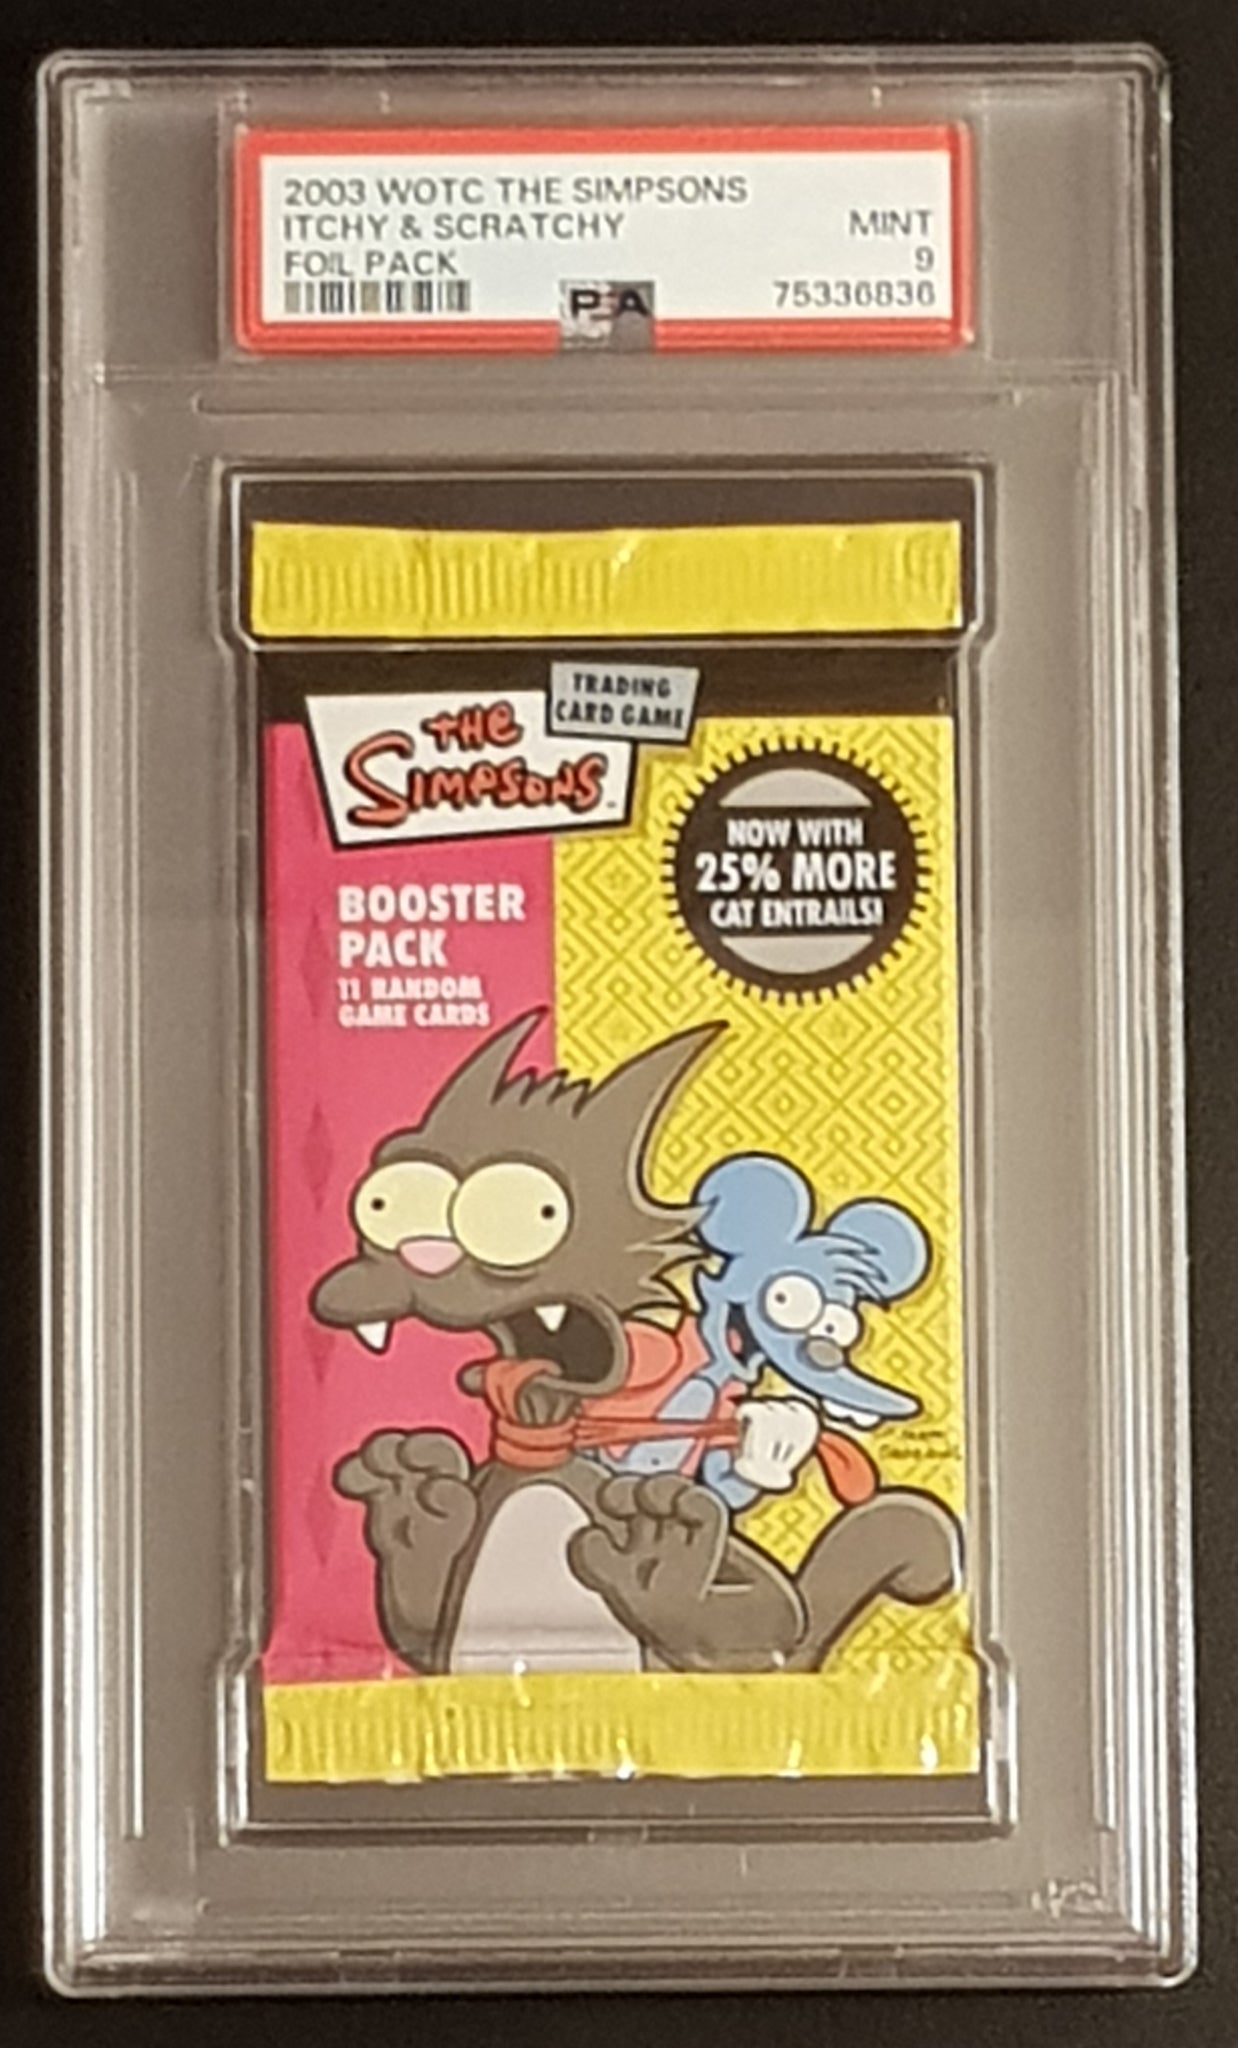 Simpsons TCG PSA 9 Sealed Trading Card Booster Pack (Itchy and Scratchy)